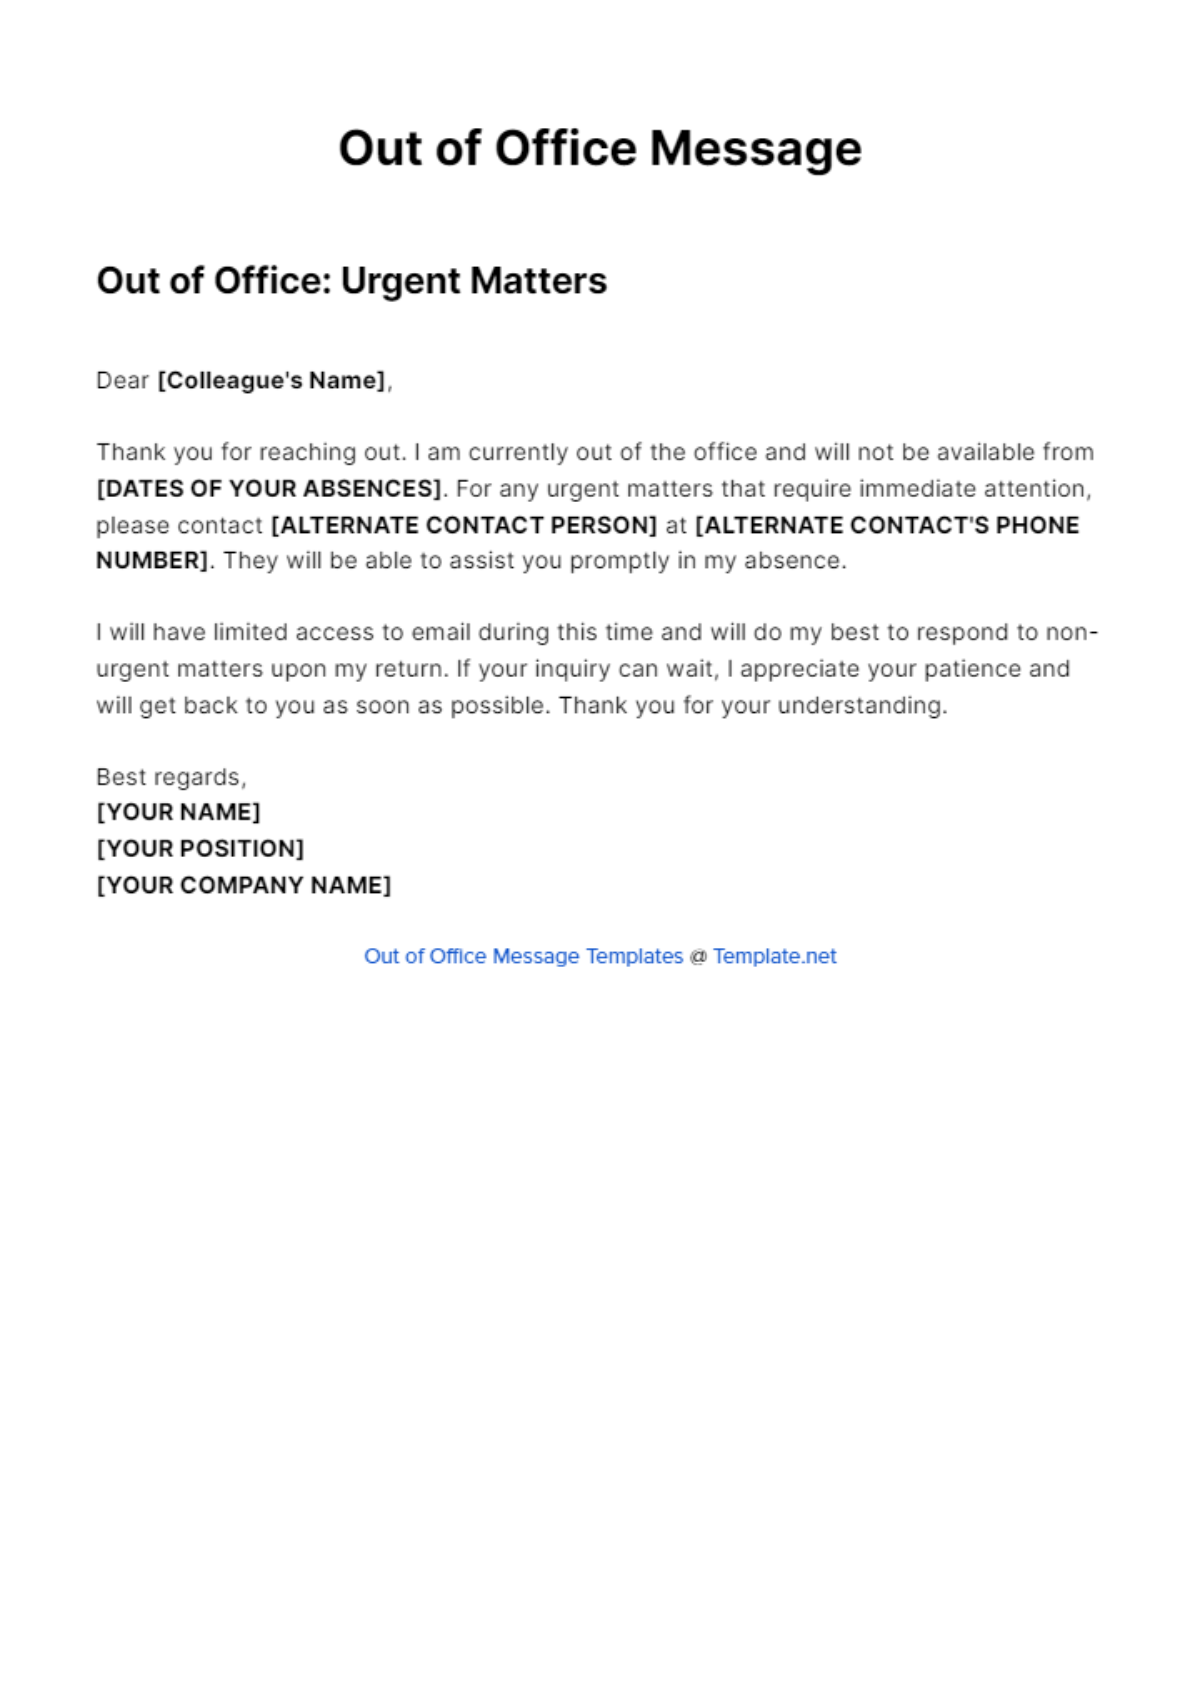 Free Out Of Office Message For Any Urgent Matters Template